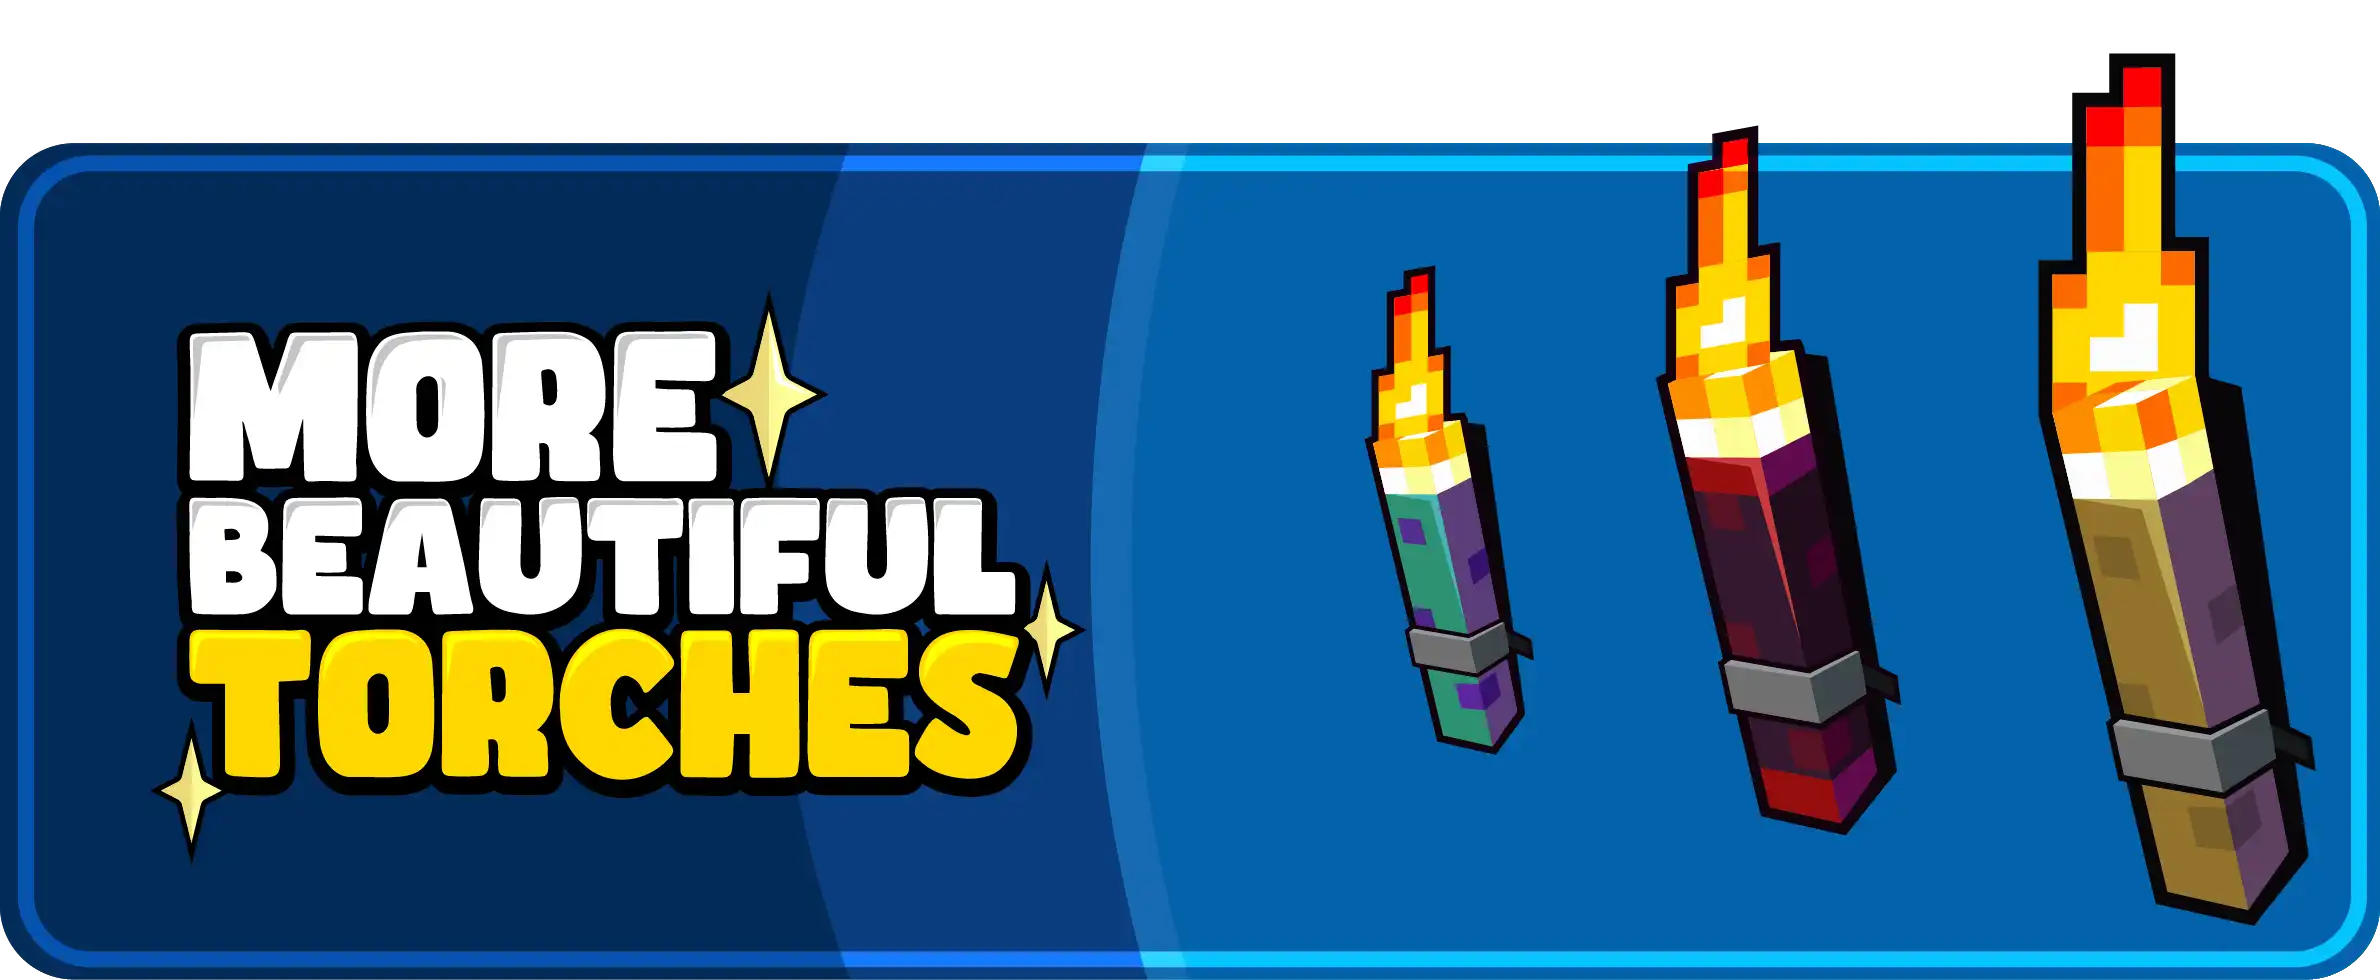 MORE BEAUTIFUL TORCHES BANNER